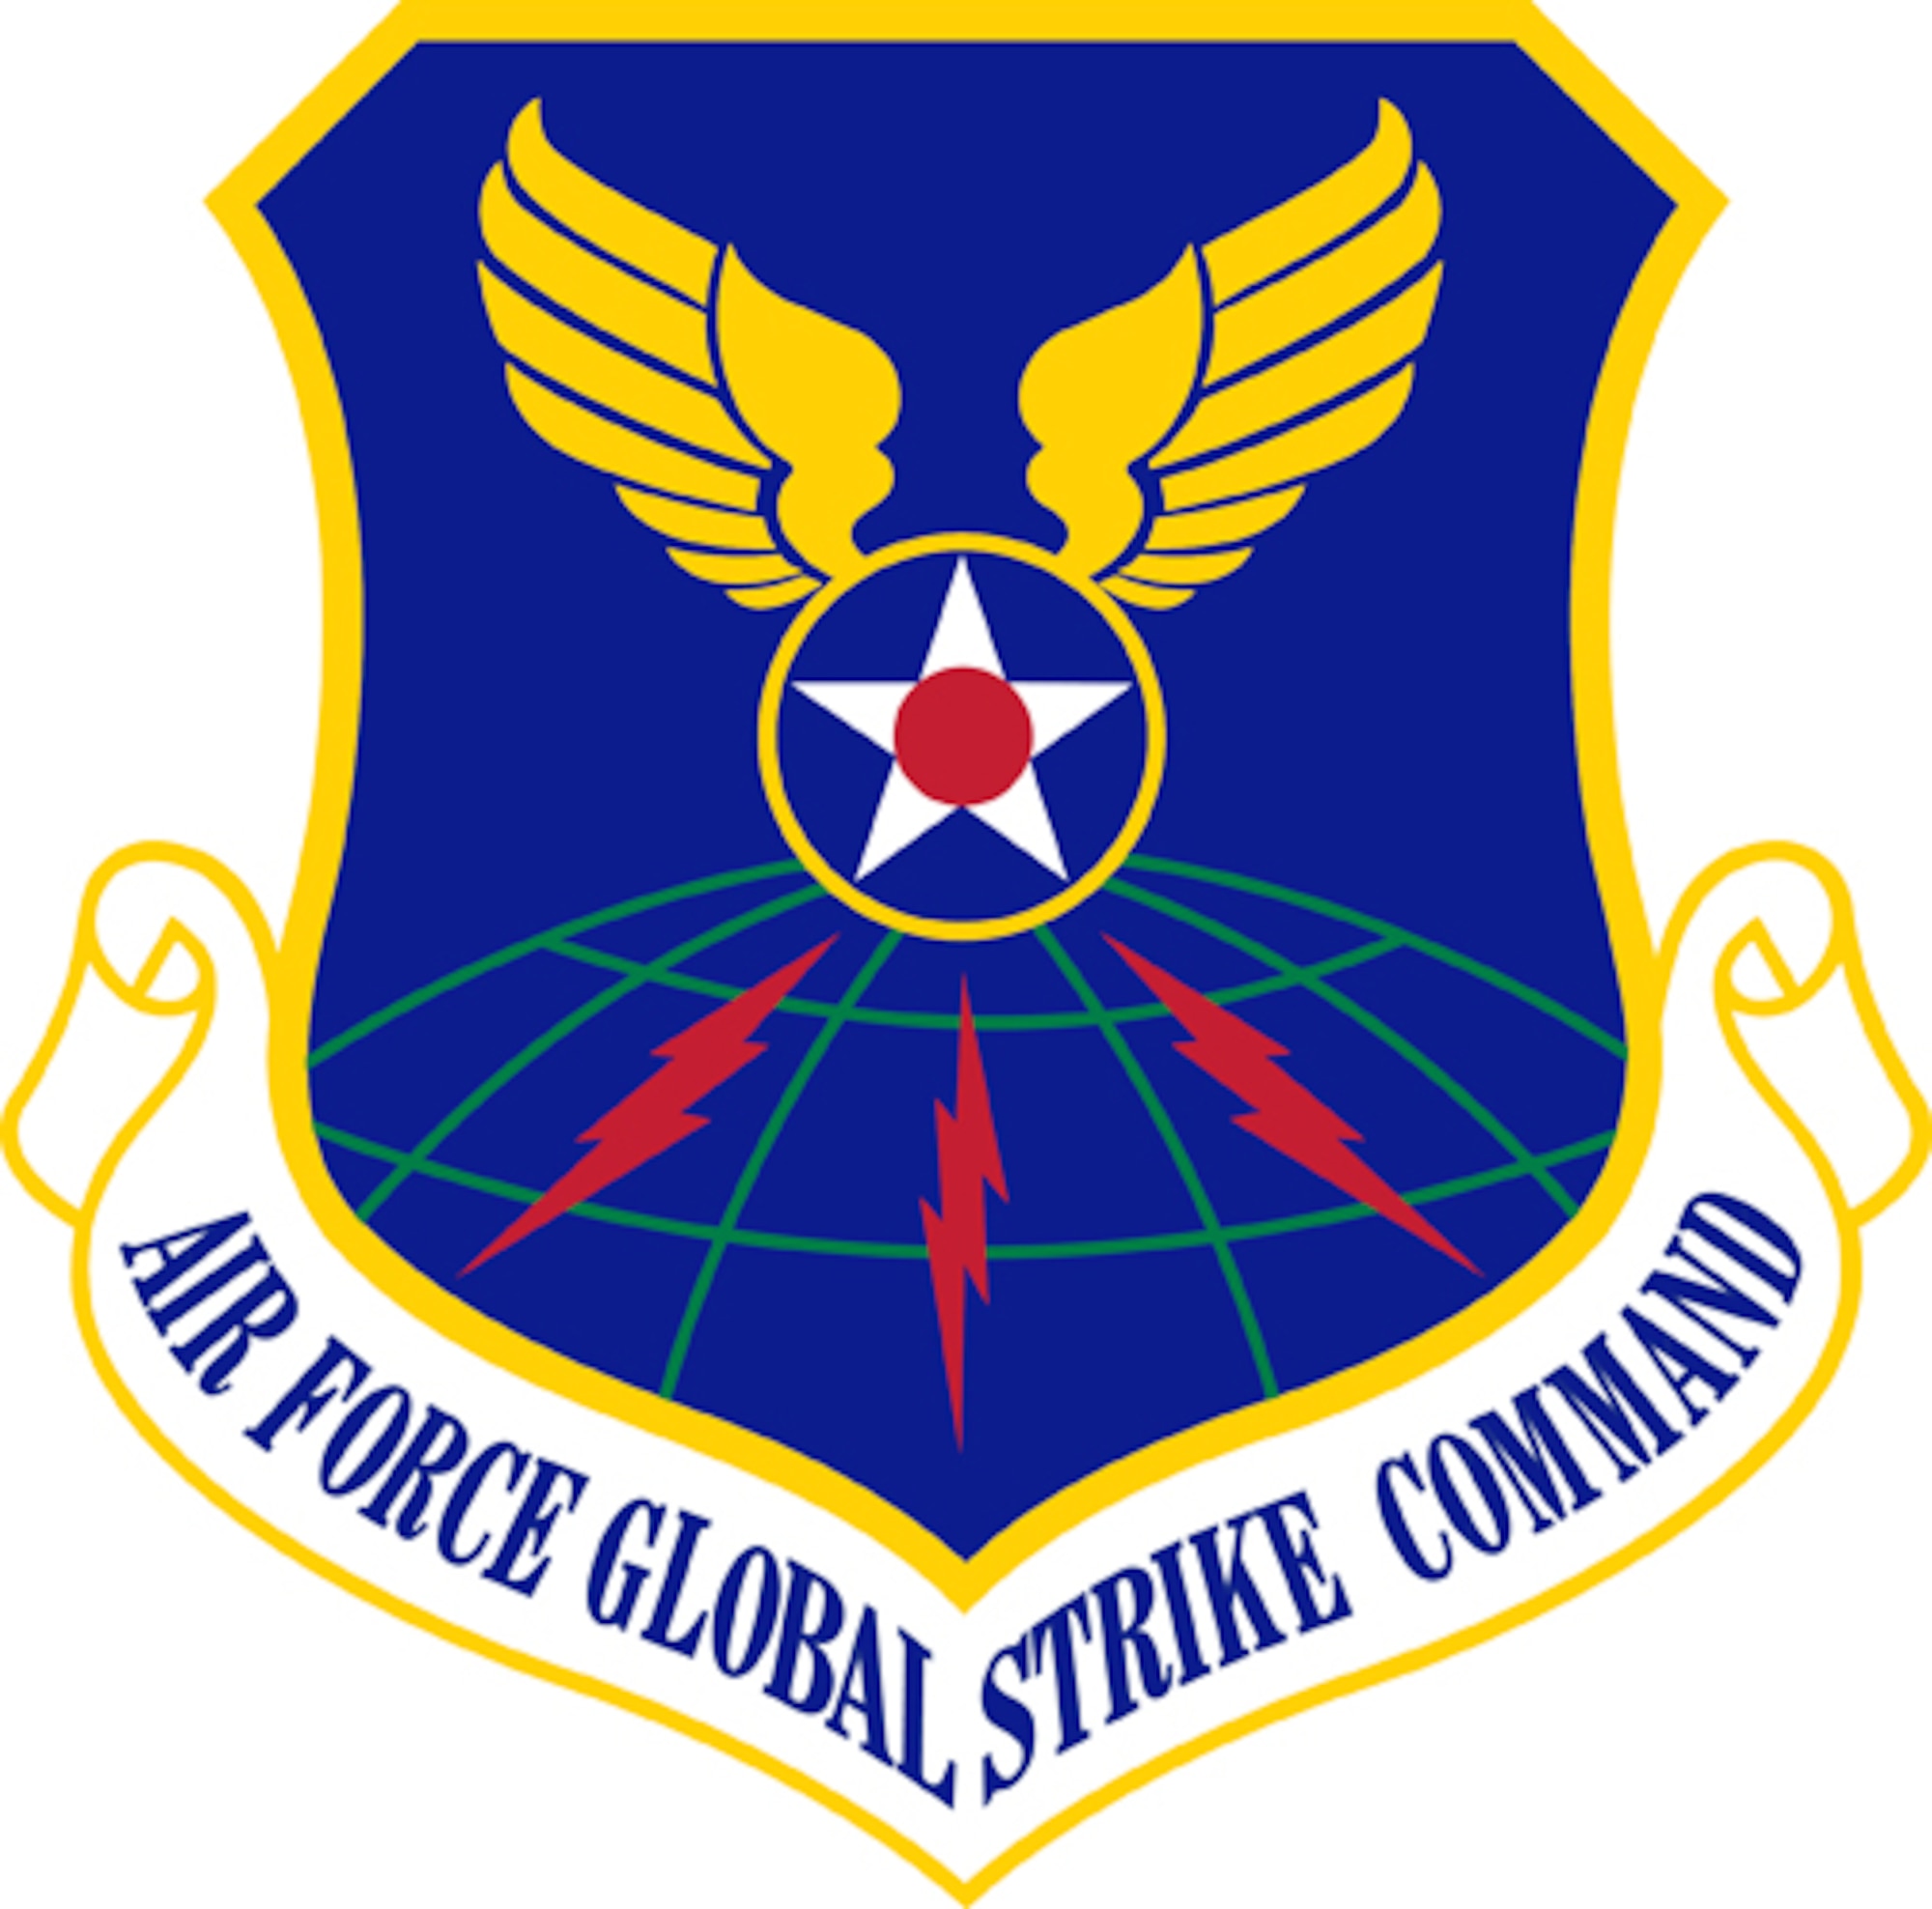 Air Force Global Strike Command Image provided by the Institute of Heraldry. In accordance with Chapter 3 of AFI 84-105, commercial reproduction of this emblem is NOT permitted without the permission of the proponent organizational/unit commander. The image is 7x7 inches @ 300 dpi. 